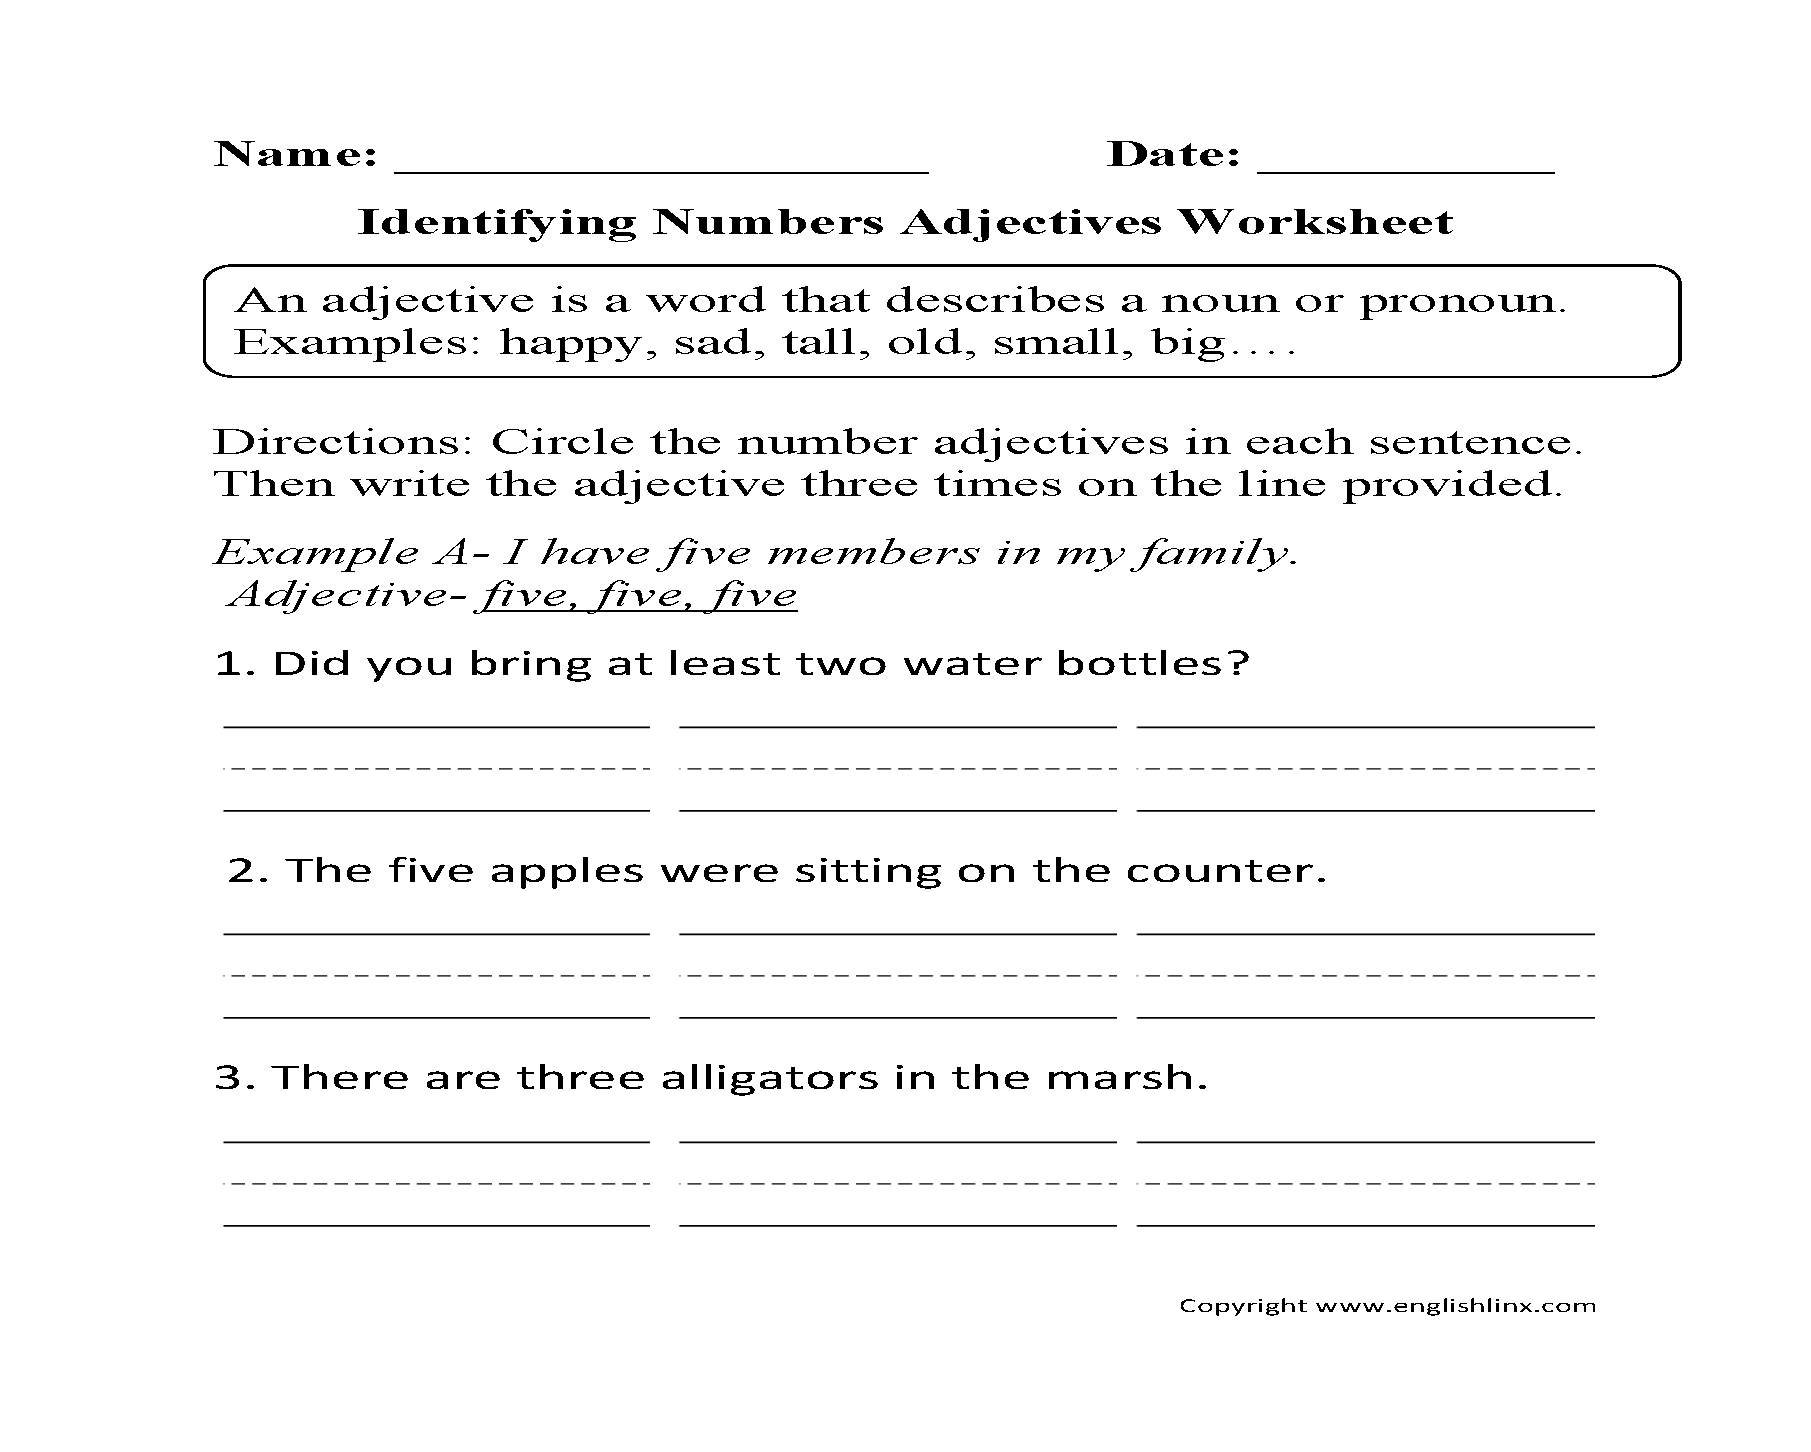 Adjectives Worksheets  Regular Adjectives Worksheets Throughout Identify Nouns And Adjectives Worksheets